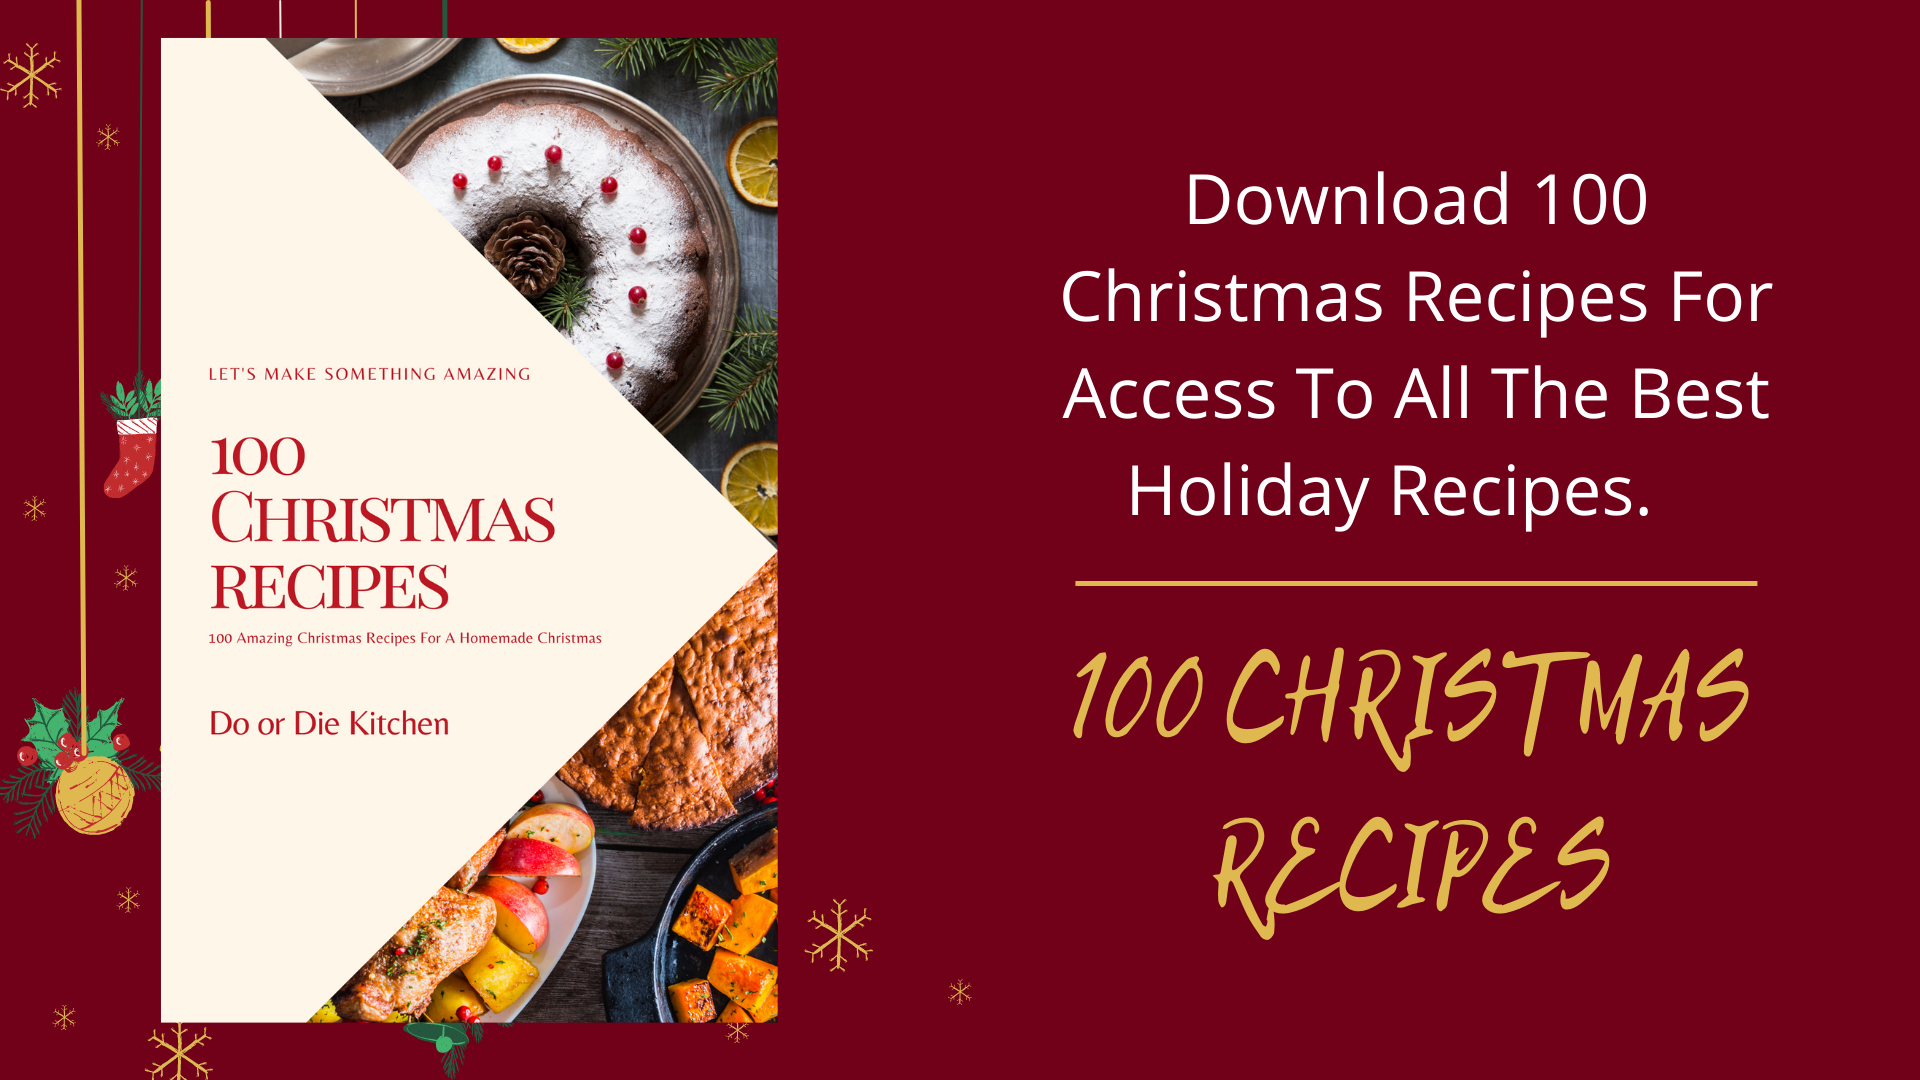 100 Christmas Recipes Banner 1920w 